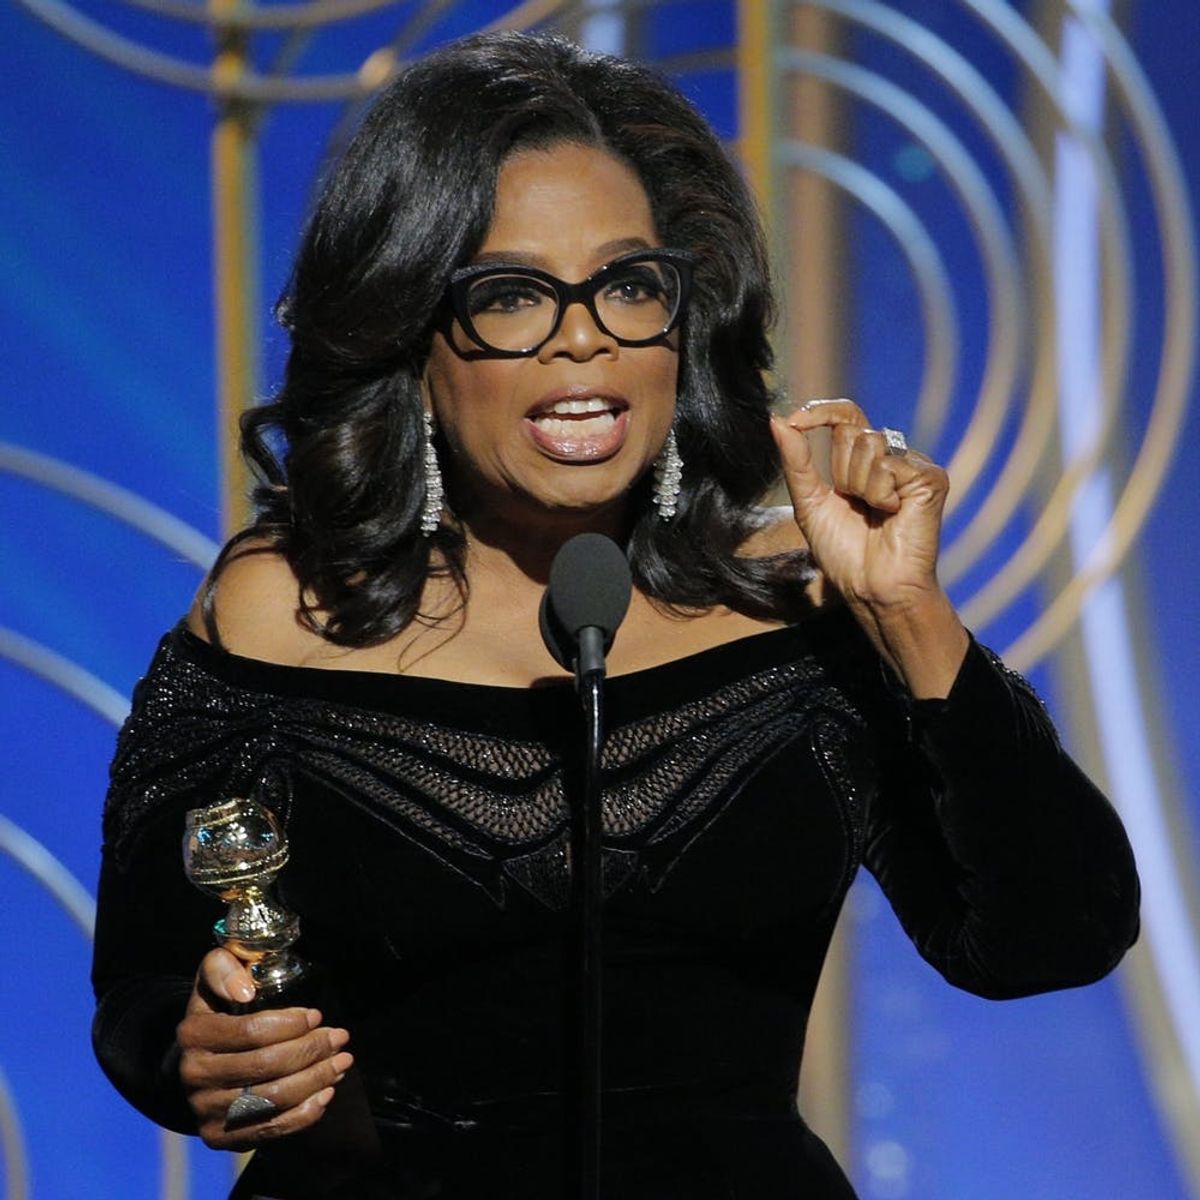 Oprah Winfrey Revealed What It Would Actually Take for Her to Run for President